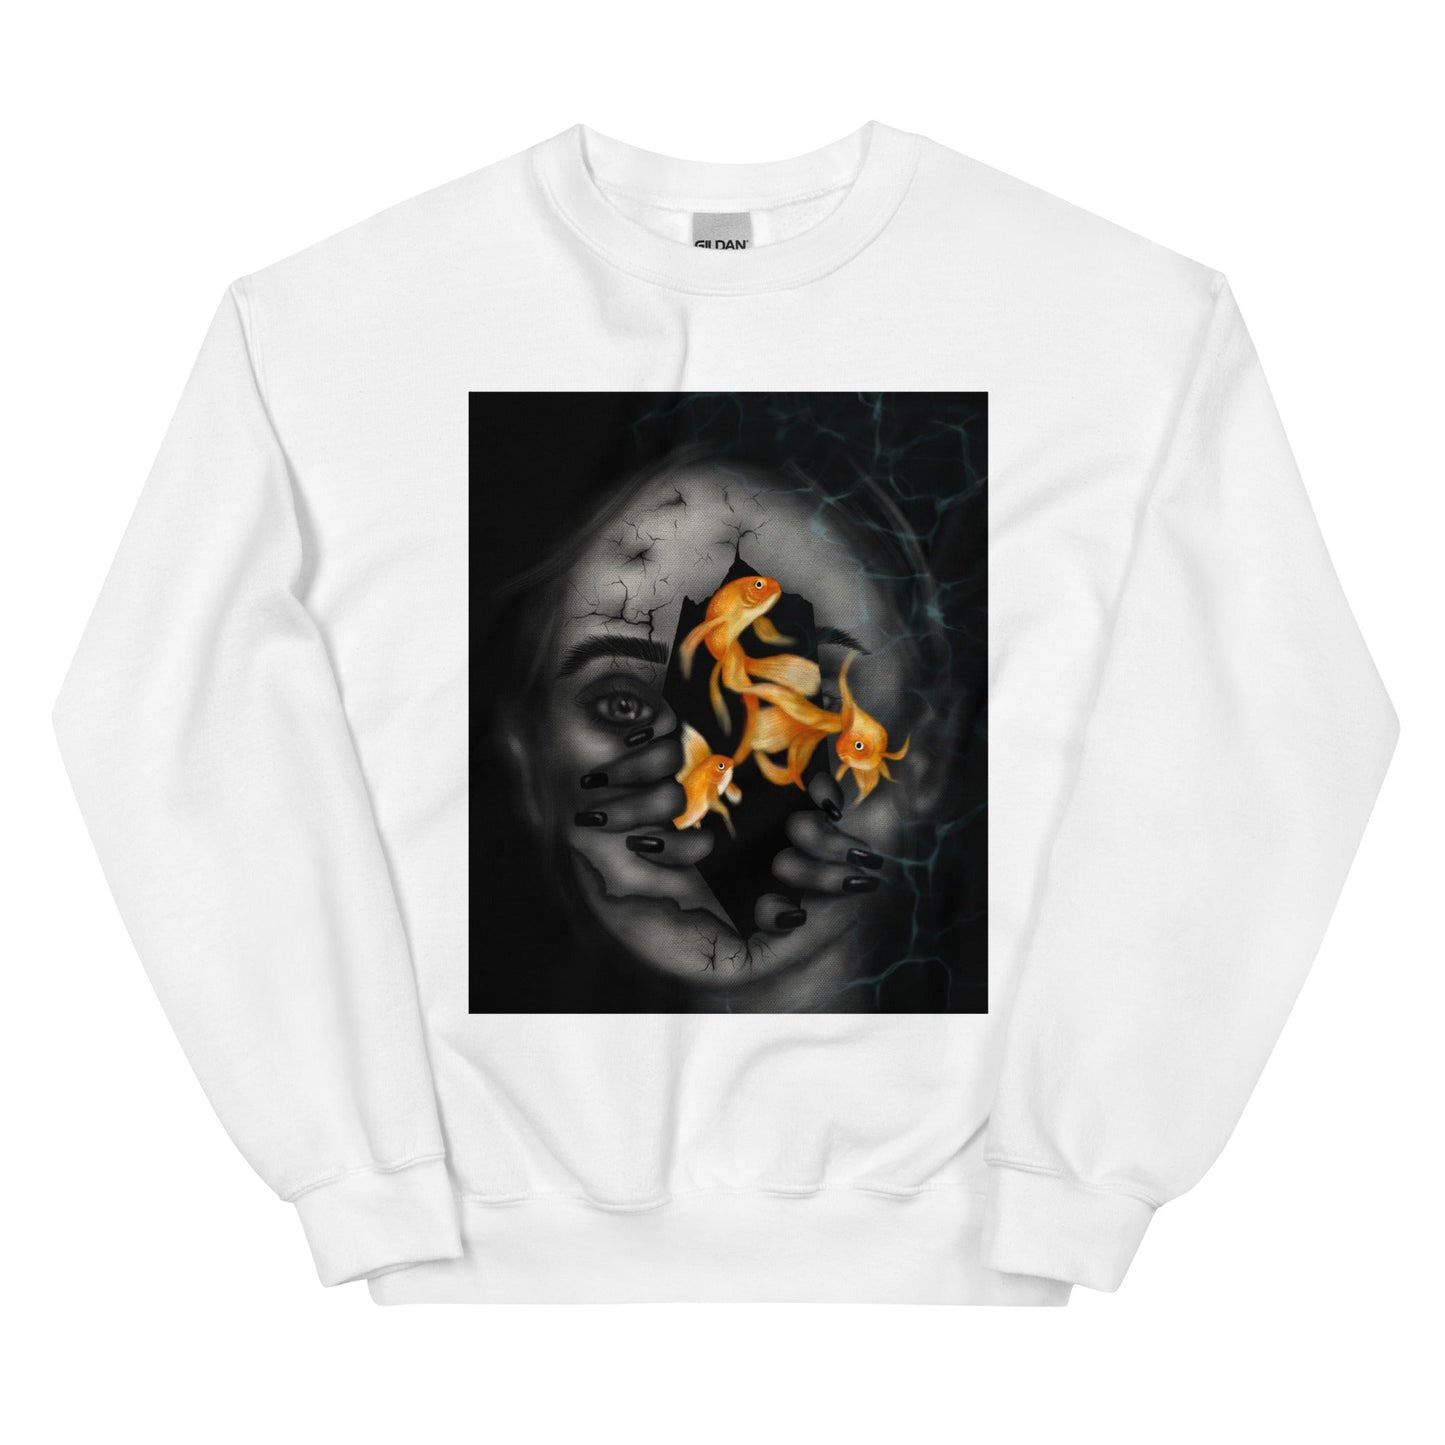 unisex-classic-sweatshirt-in-search-of-freedom-white